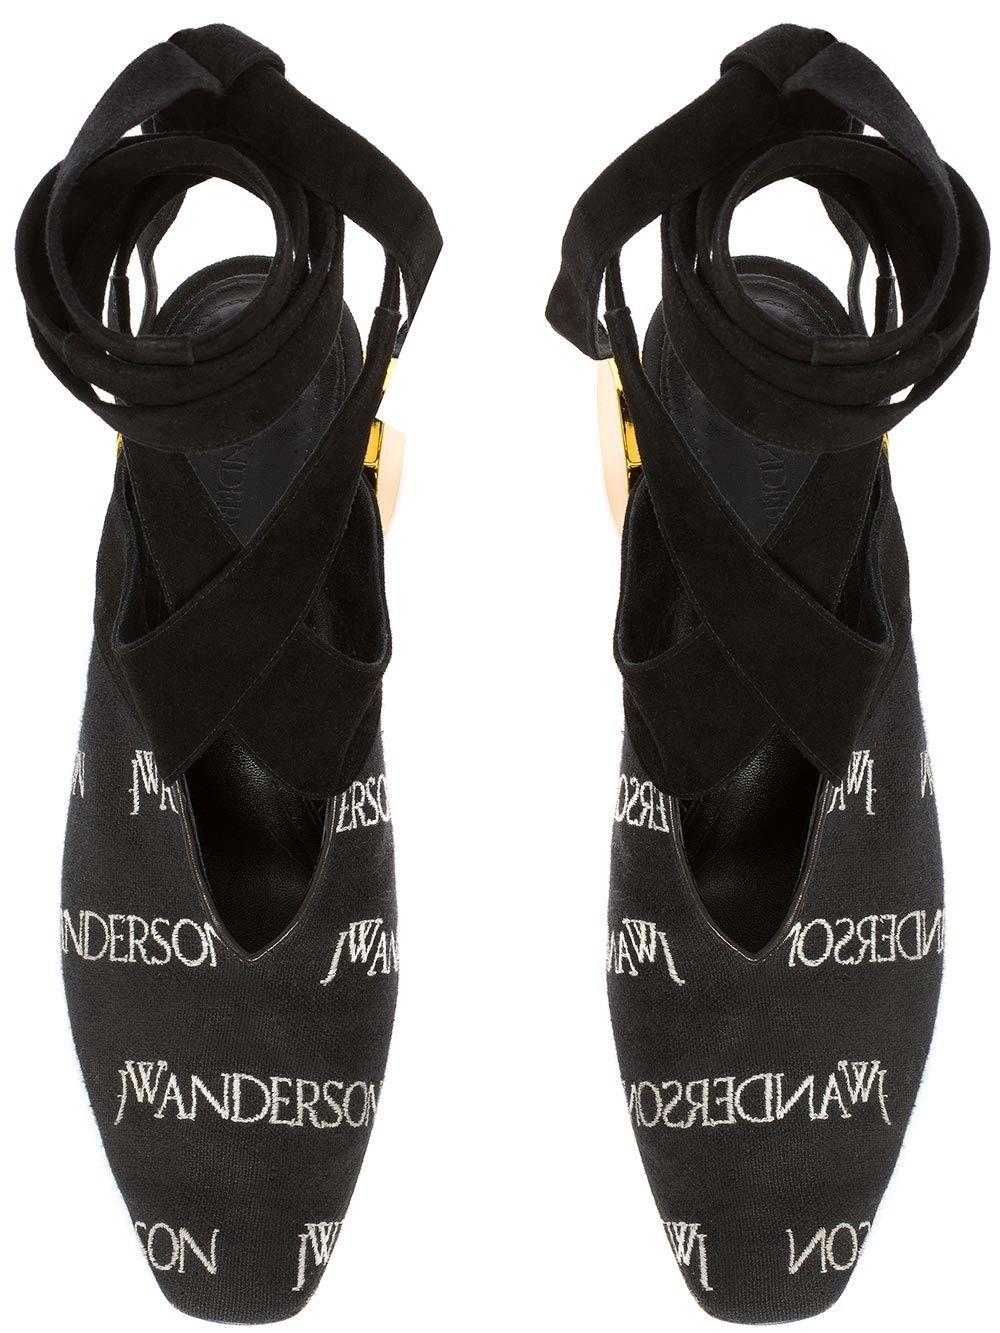 JW Anderson Canvas Logo Ballet Shoes in Black Lyst